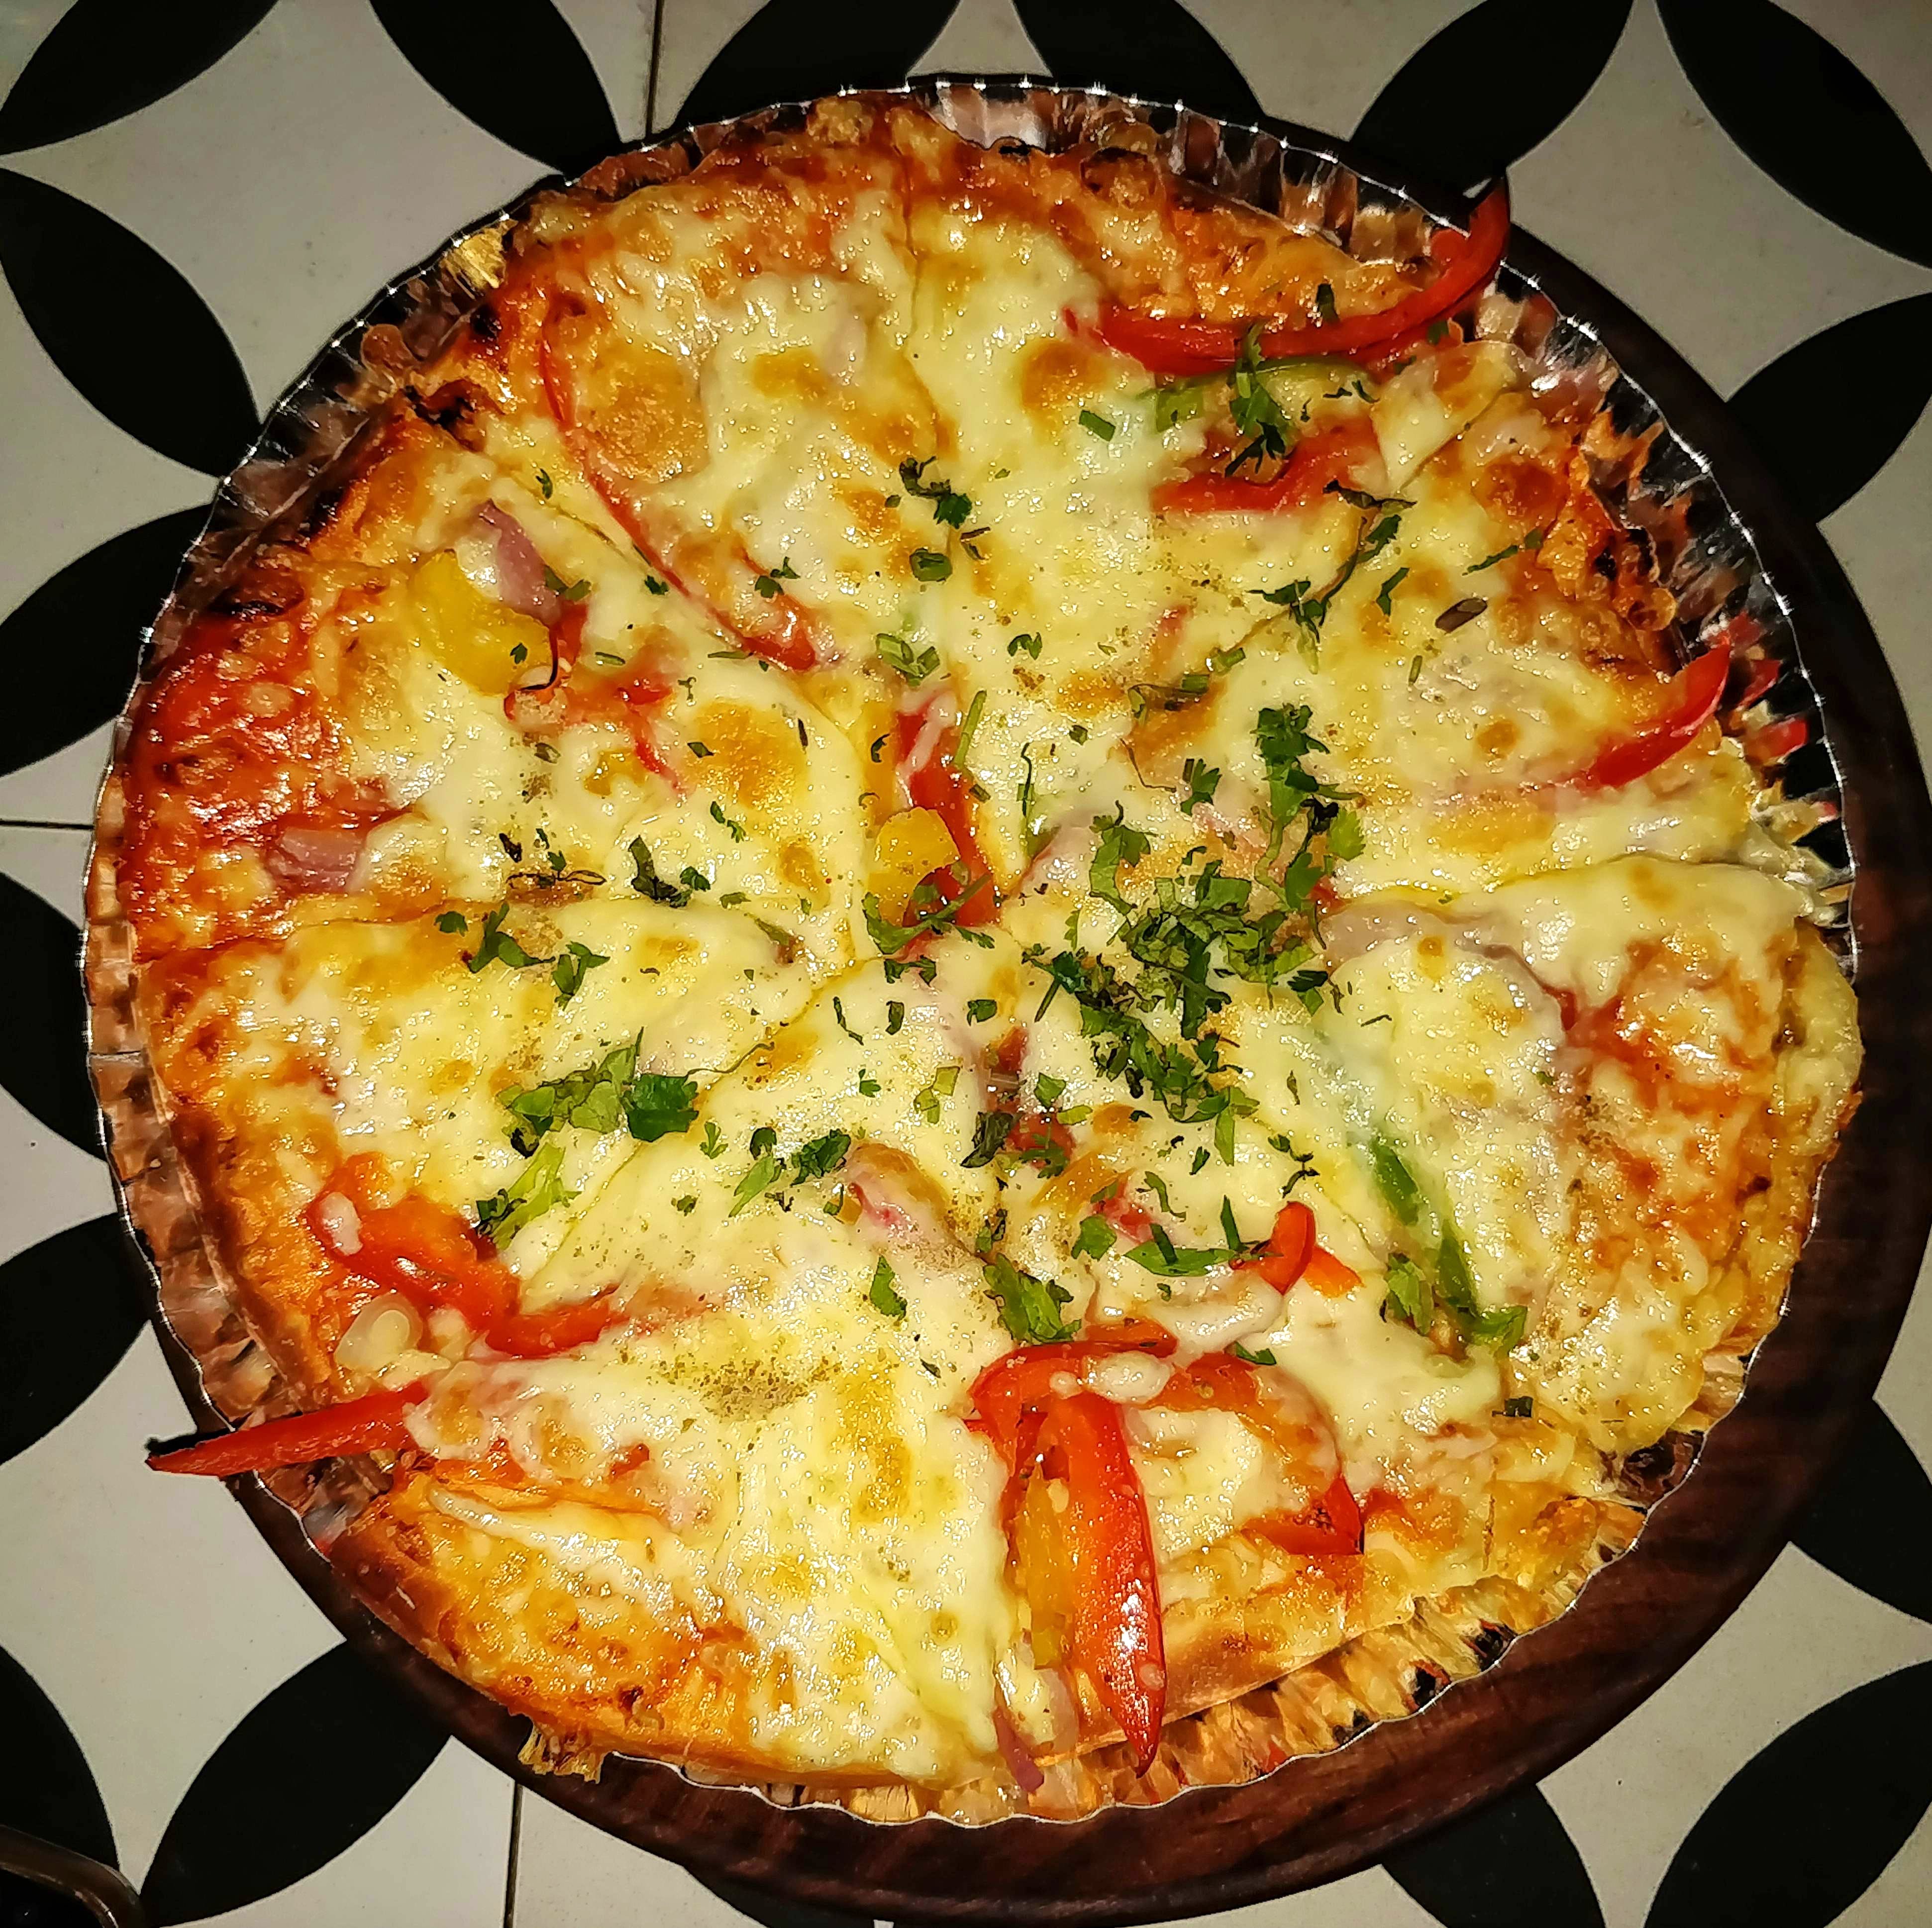 Dish,Food,Cuisine,Pizza cheese,Pizza,Ingredient,Quiche,California-style pizza,Sicilian pizza,Baked goods